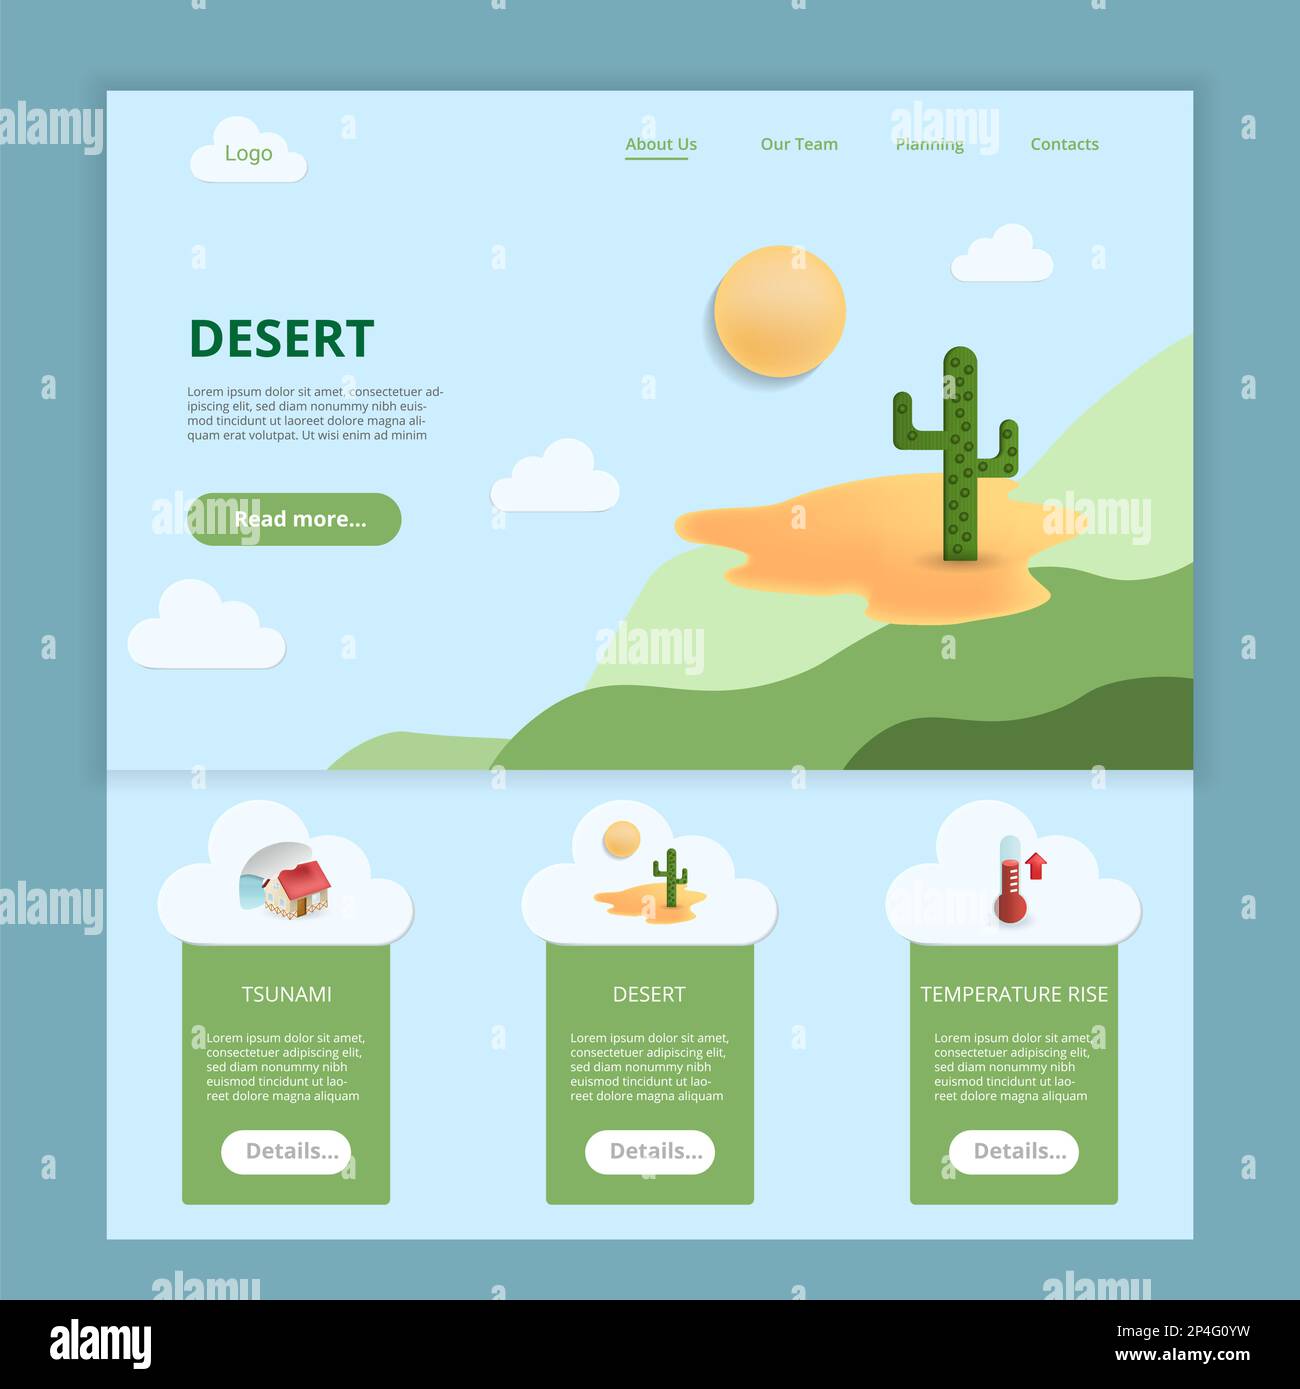 Desert flat landing page website template. Tsunami, desert, temperature rise. Web banner with header, content and footer. Vector illustration. Stock Vector